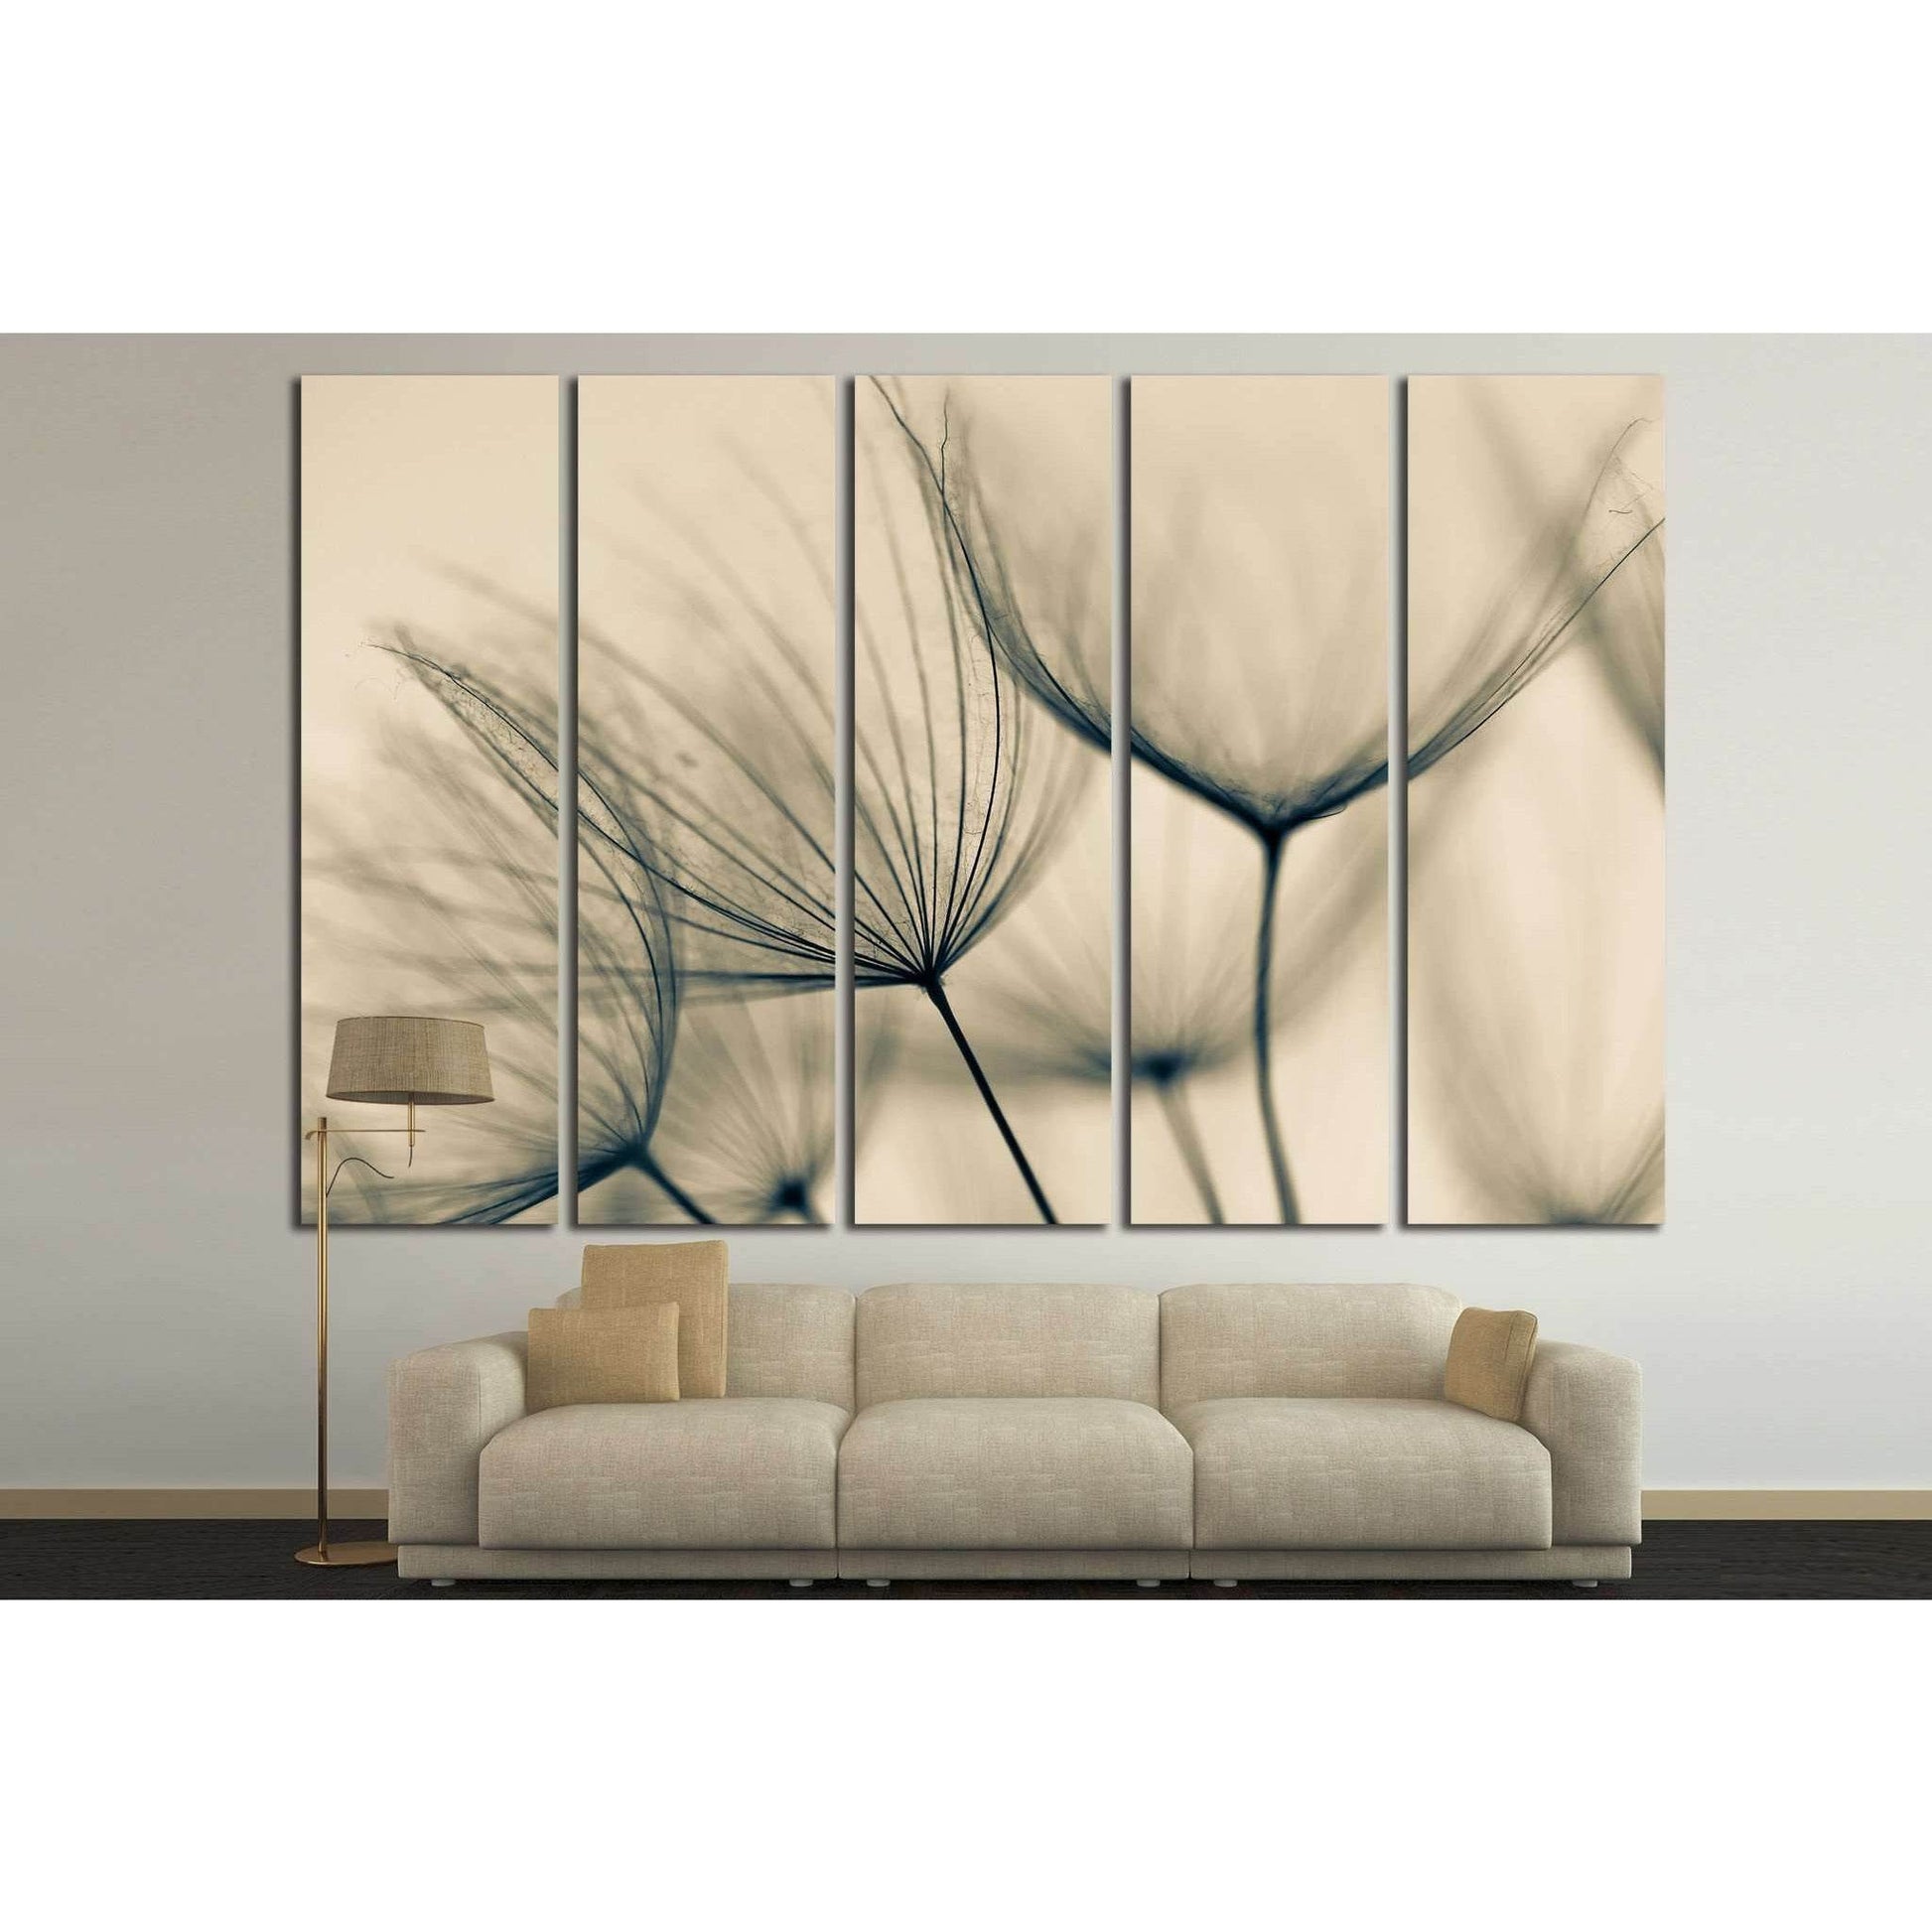 Abstract Neutral Tone Dandelion Wall Art for Minimalist InteriorsThis canvas print features an artistic close-up of dandelion seeds, rendered in soft monochrome tones that highlight the delicate structure of each filament. The abstract nature and gentle a